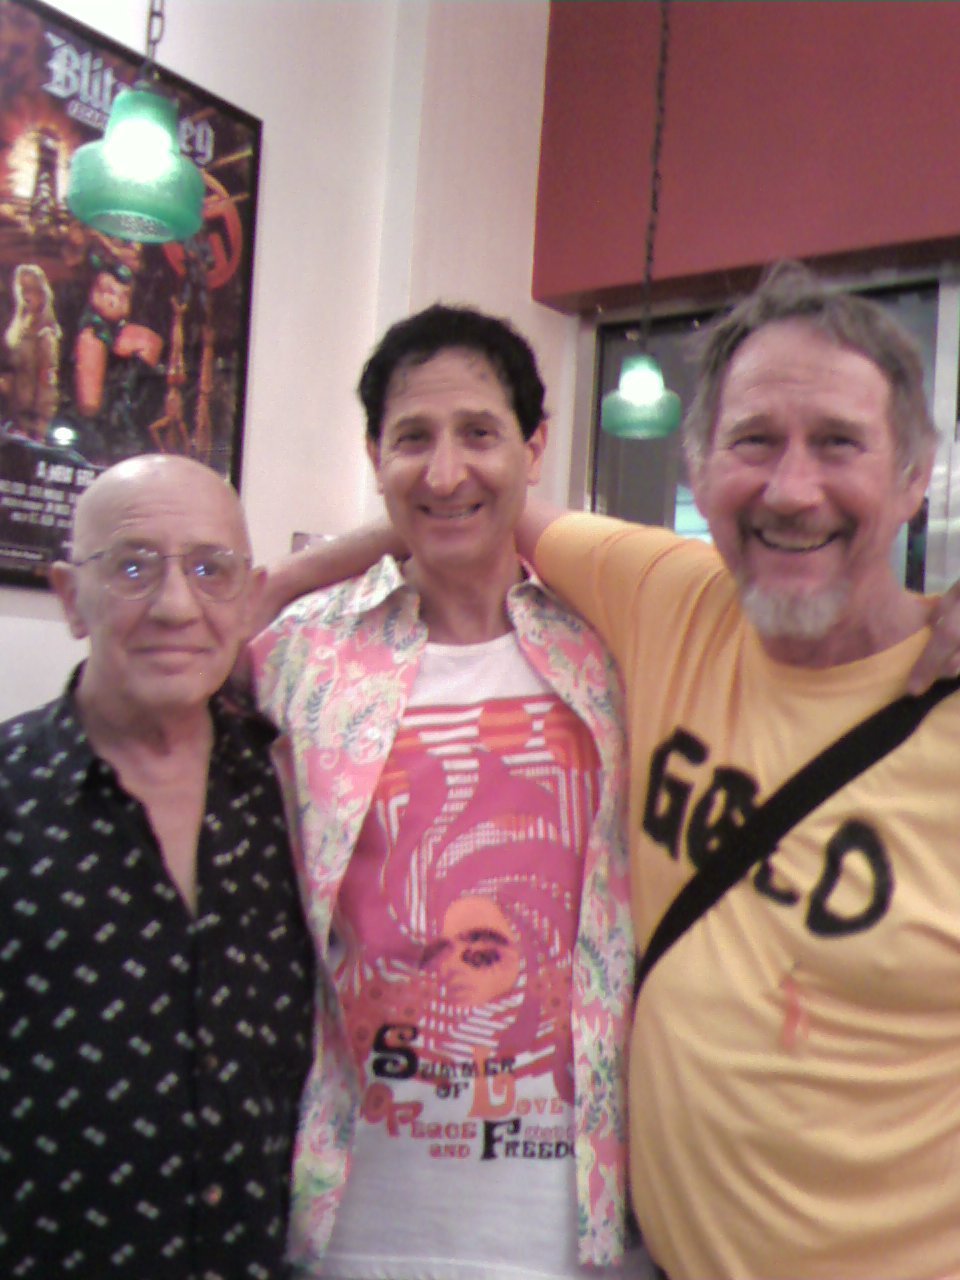 screening premier of the movie GOLD at the PIONEER THEATER(in NYC) in 2008. from left to right Gary Goodrow, Claude Laniado, Bob Levis